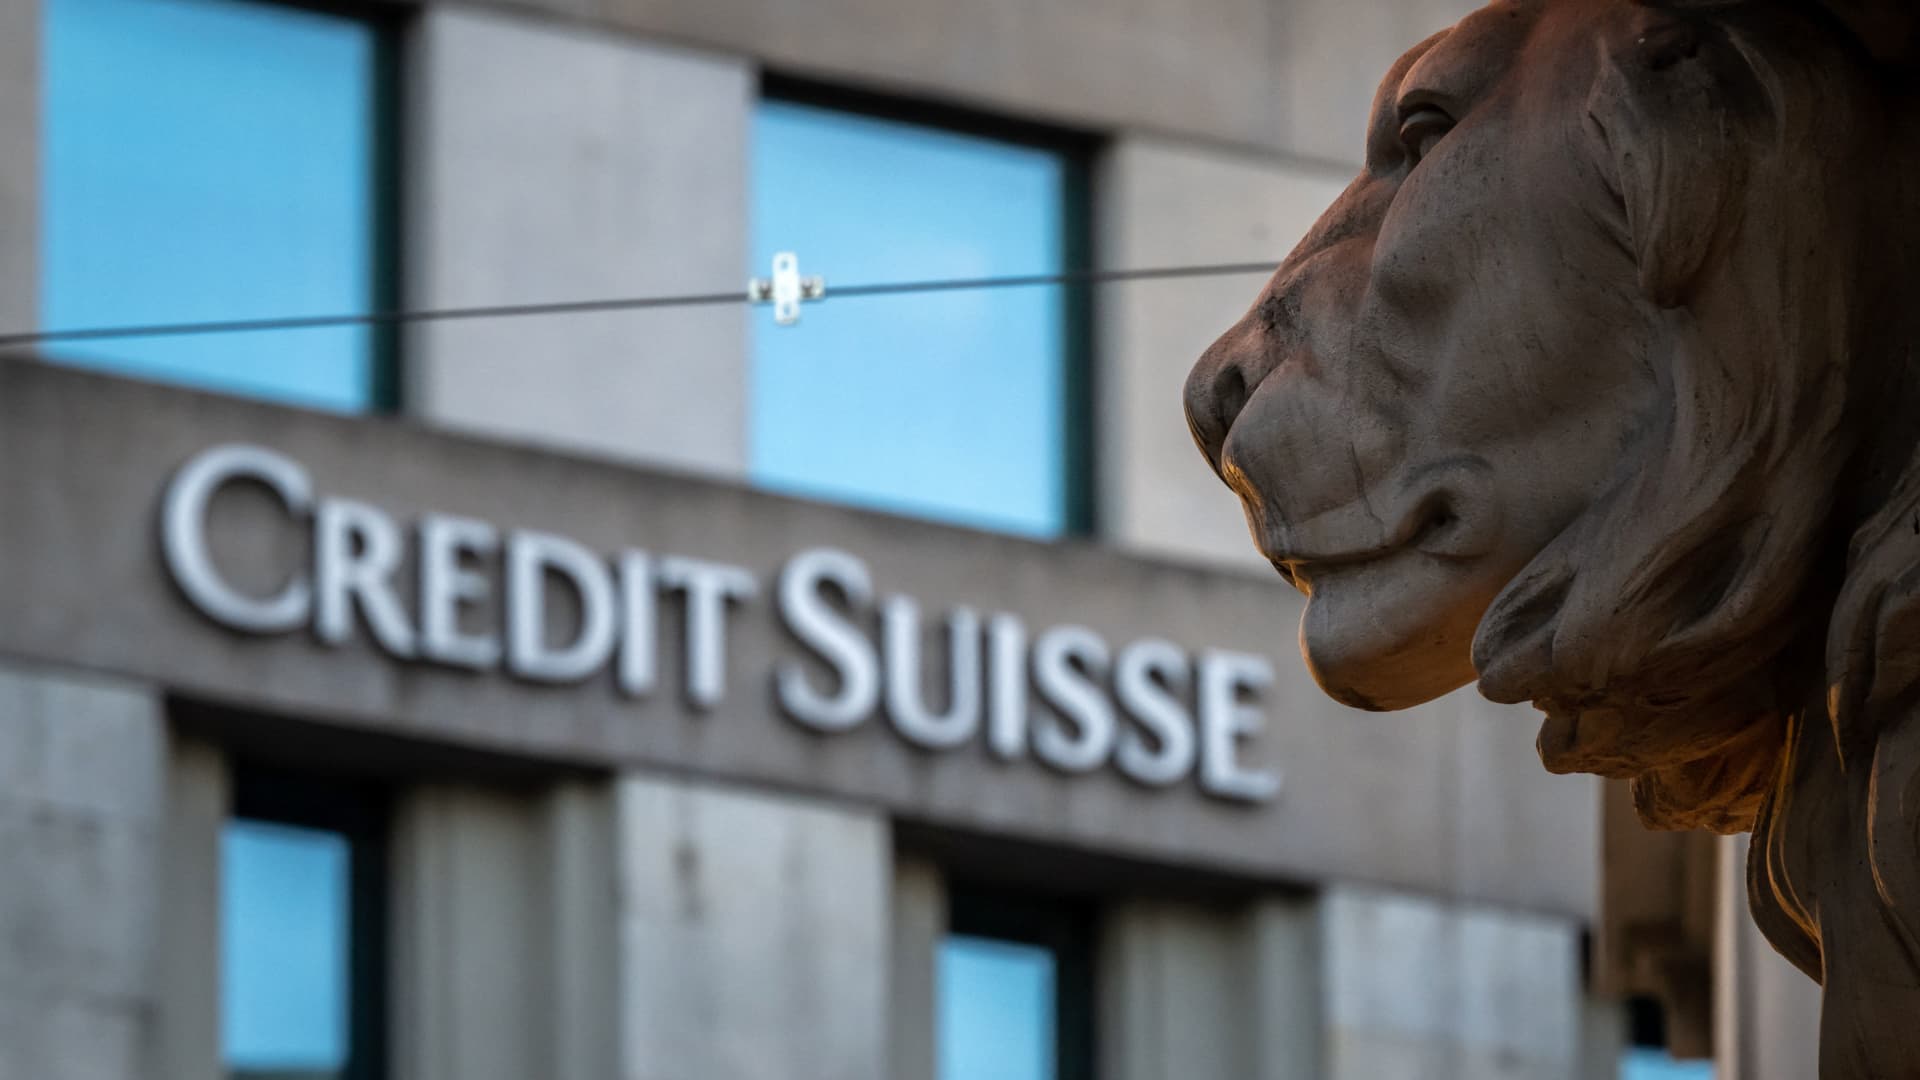 Everyone's talking about Credit Suisse's risky bonds. Here's what they are and why they matter